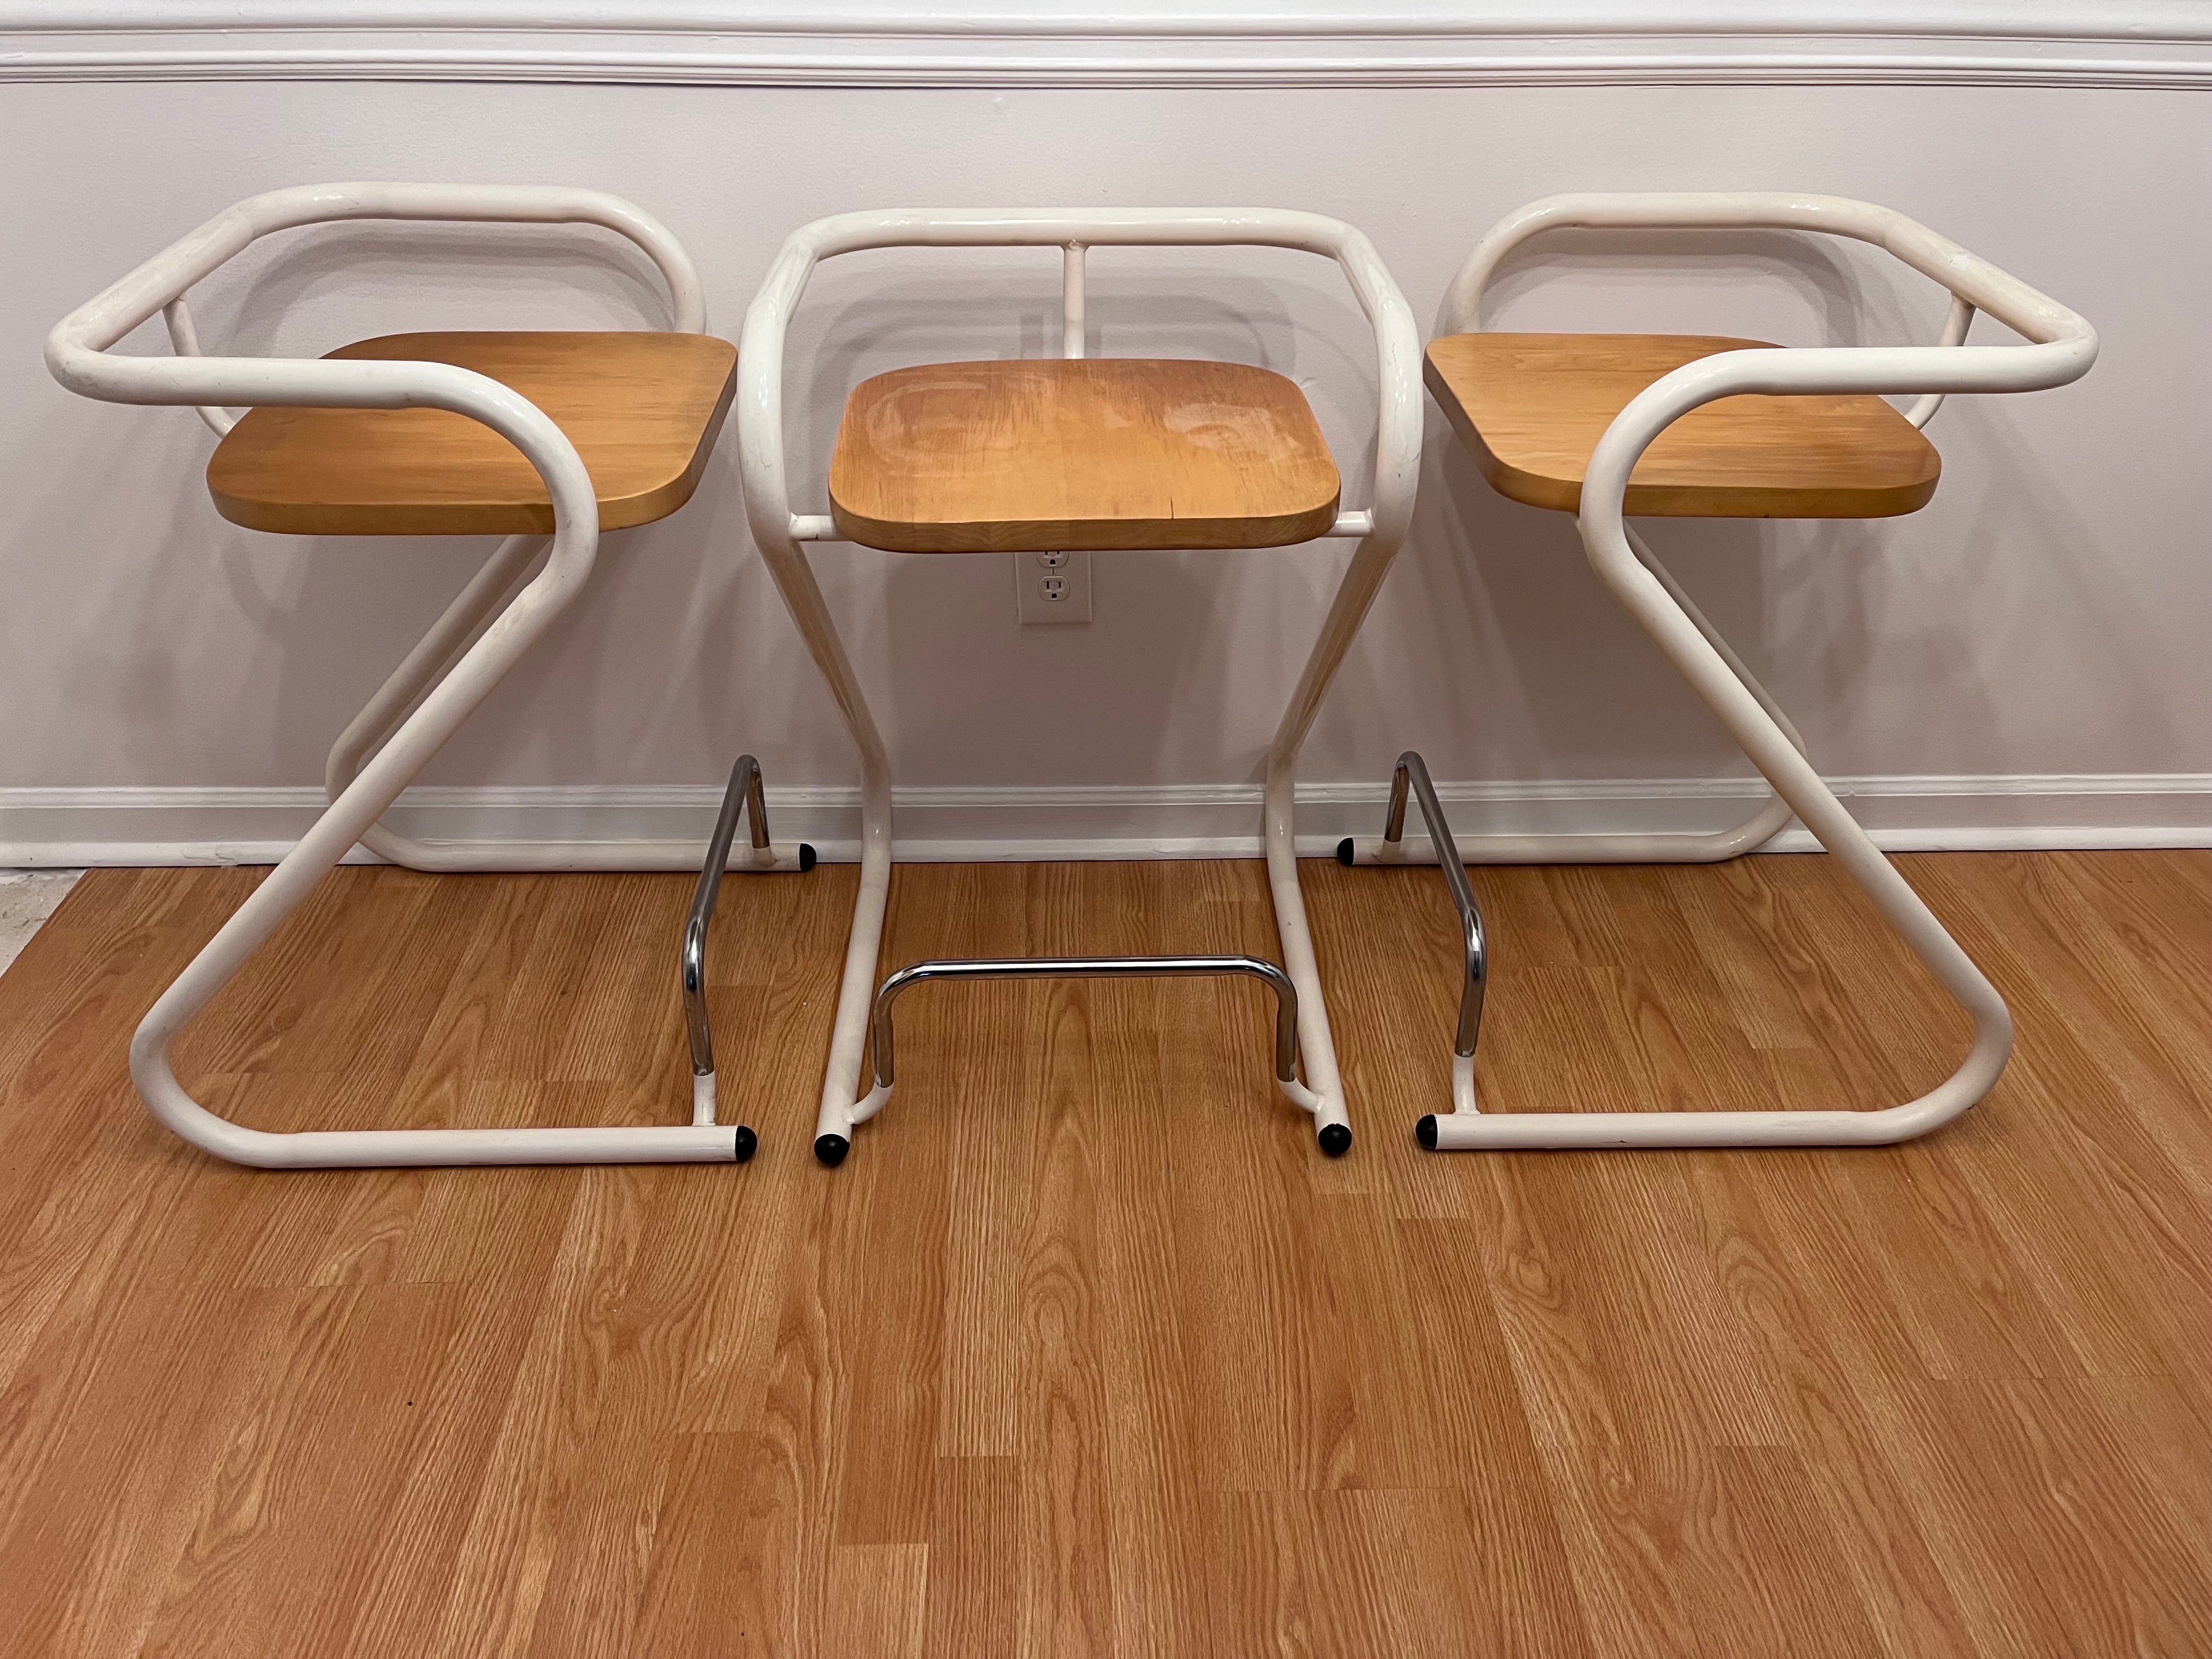 A set of three Z form post modern style circa 1970's tubular steel and wood counter height stools by French Canadien company Les Industries Amisco. The company is also well known for their paper clip form stool. Amisco has been designing beautiful